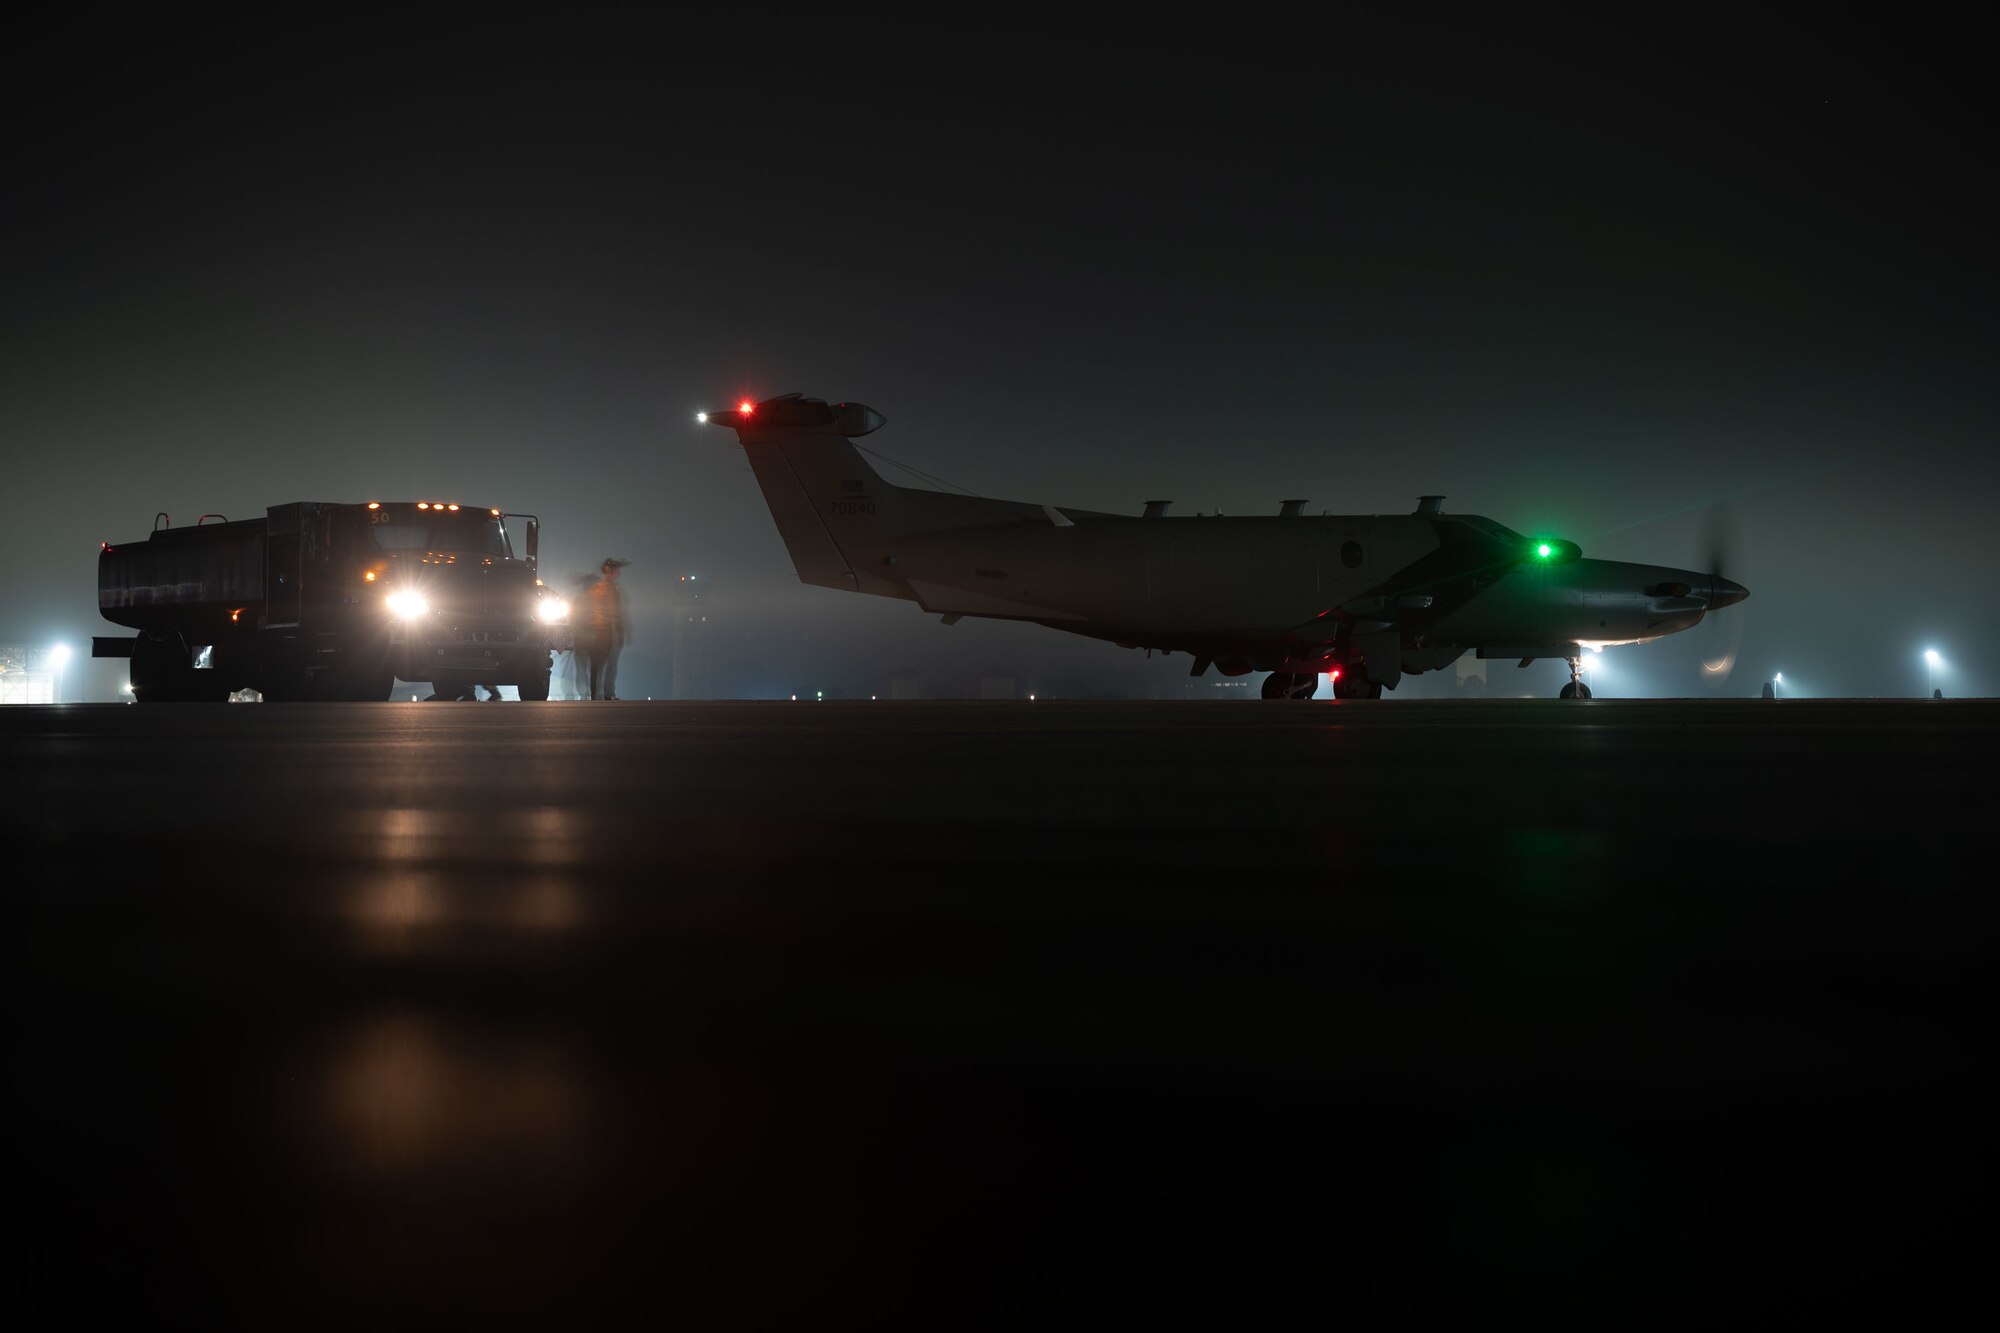 Hot refuels involve quickly refueling an aircraft while the engine is running, and are usually part of contingency operations like those found in austere environments.